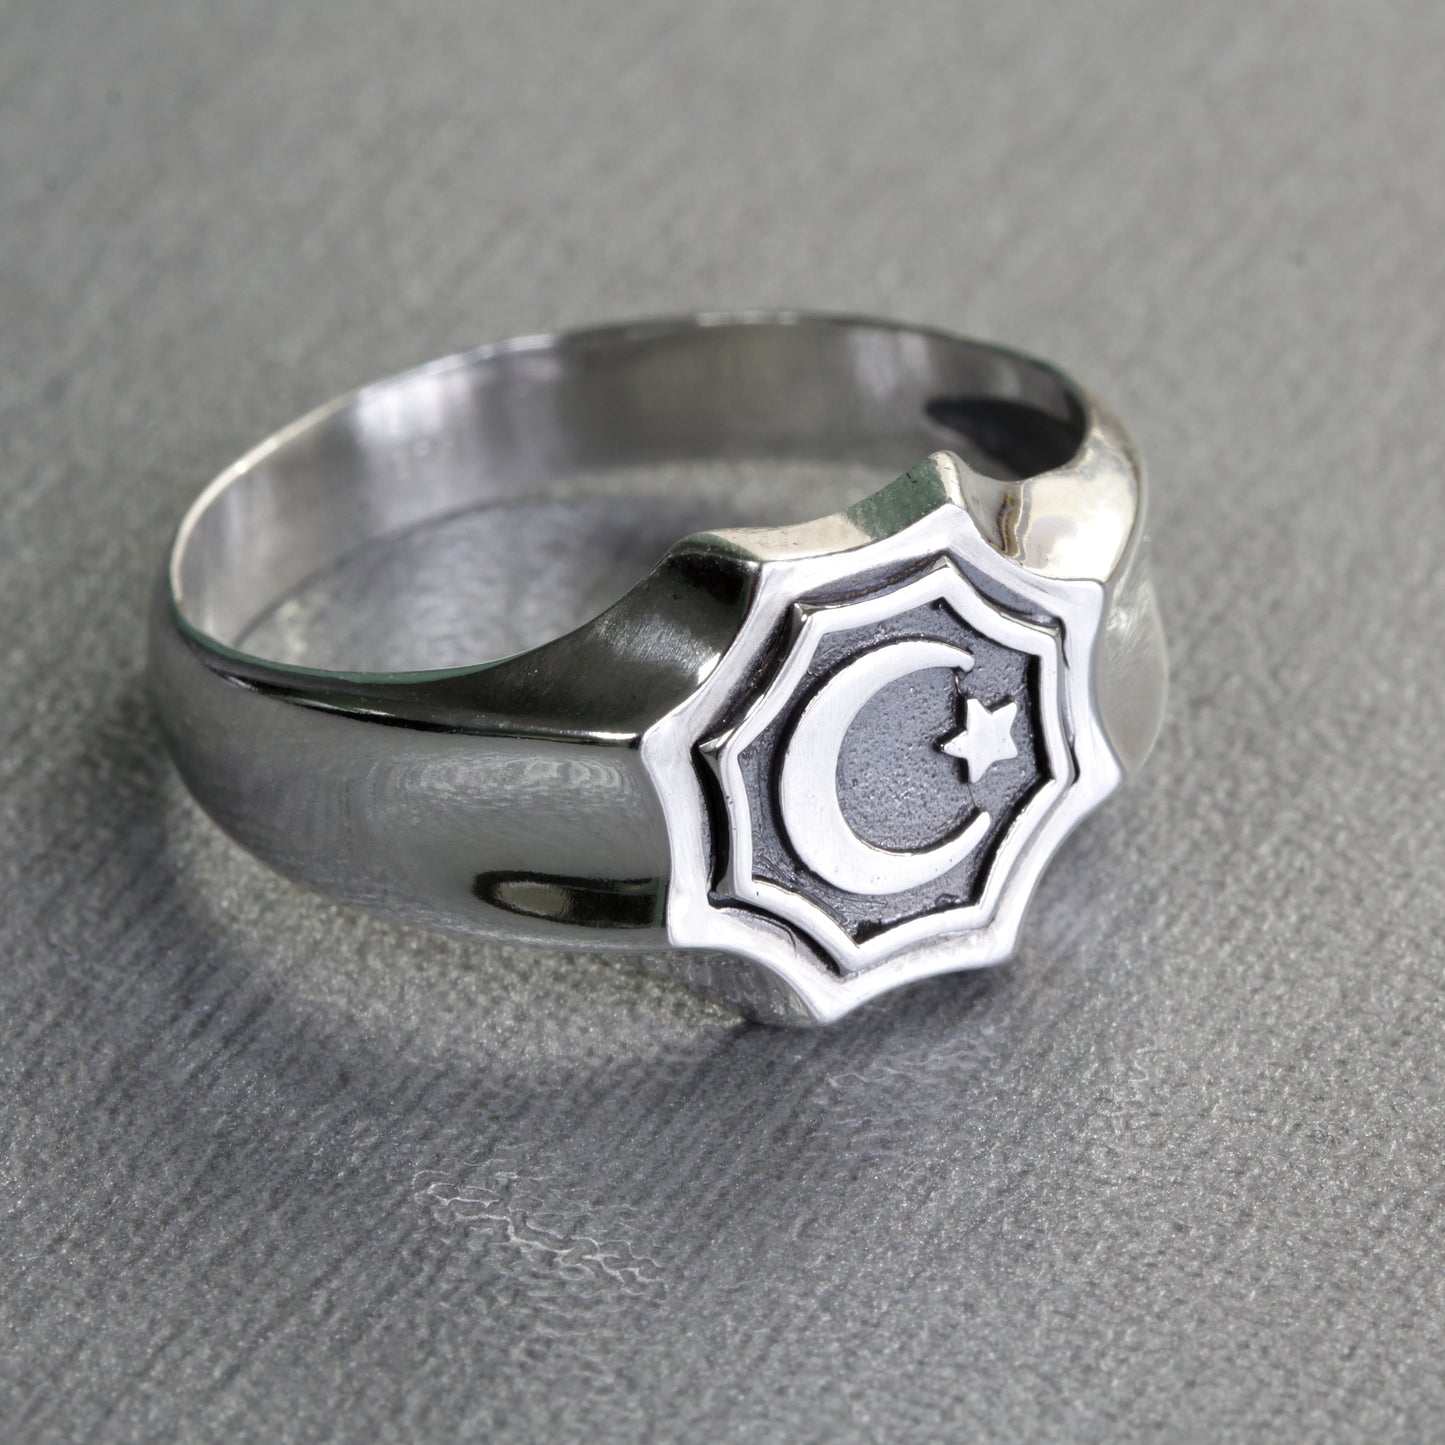 Islam Symbol Star and Crescent Moon Silver 925 Mens Ring